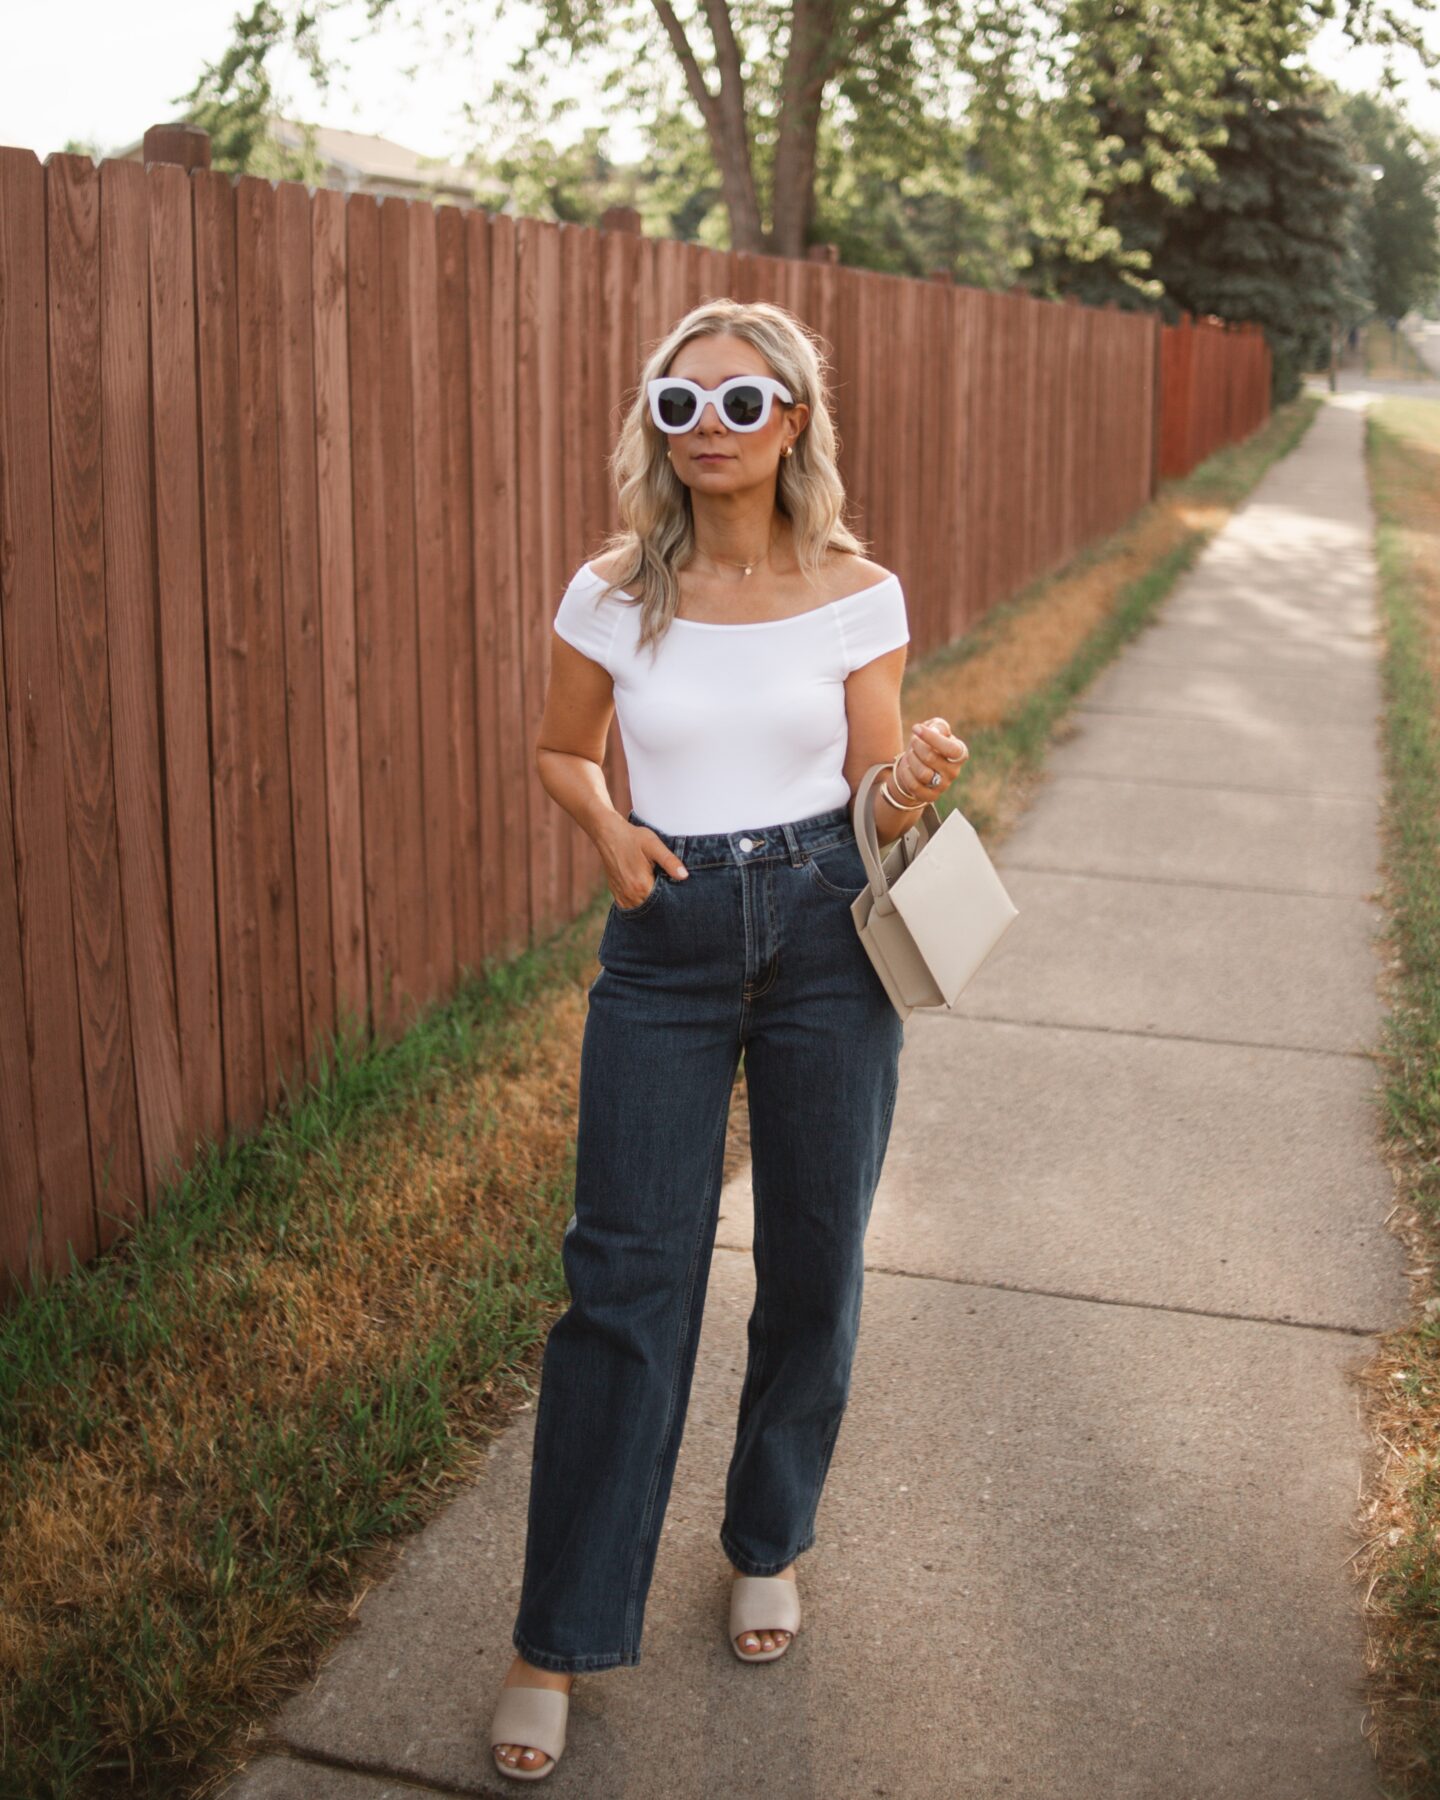 Karin Emily wears the Everlane Way High Baggy Jean, white bodysuit, nude sandals heels for her Everlane Denim Guide